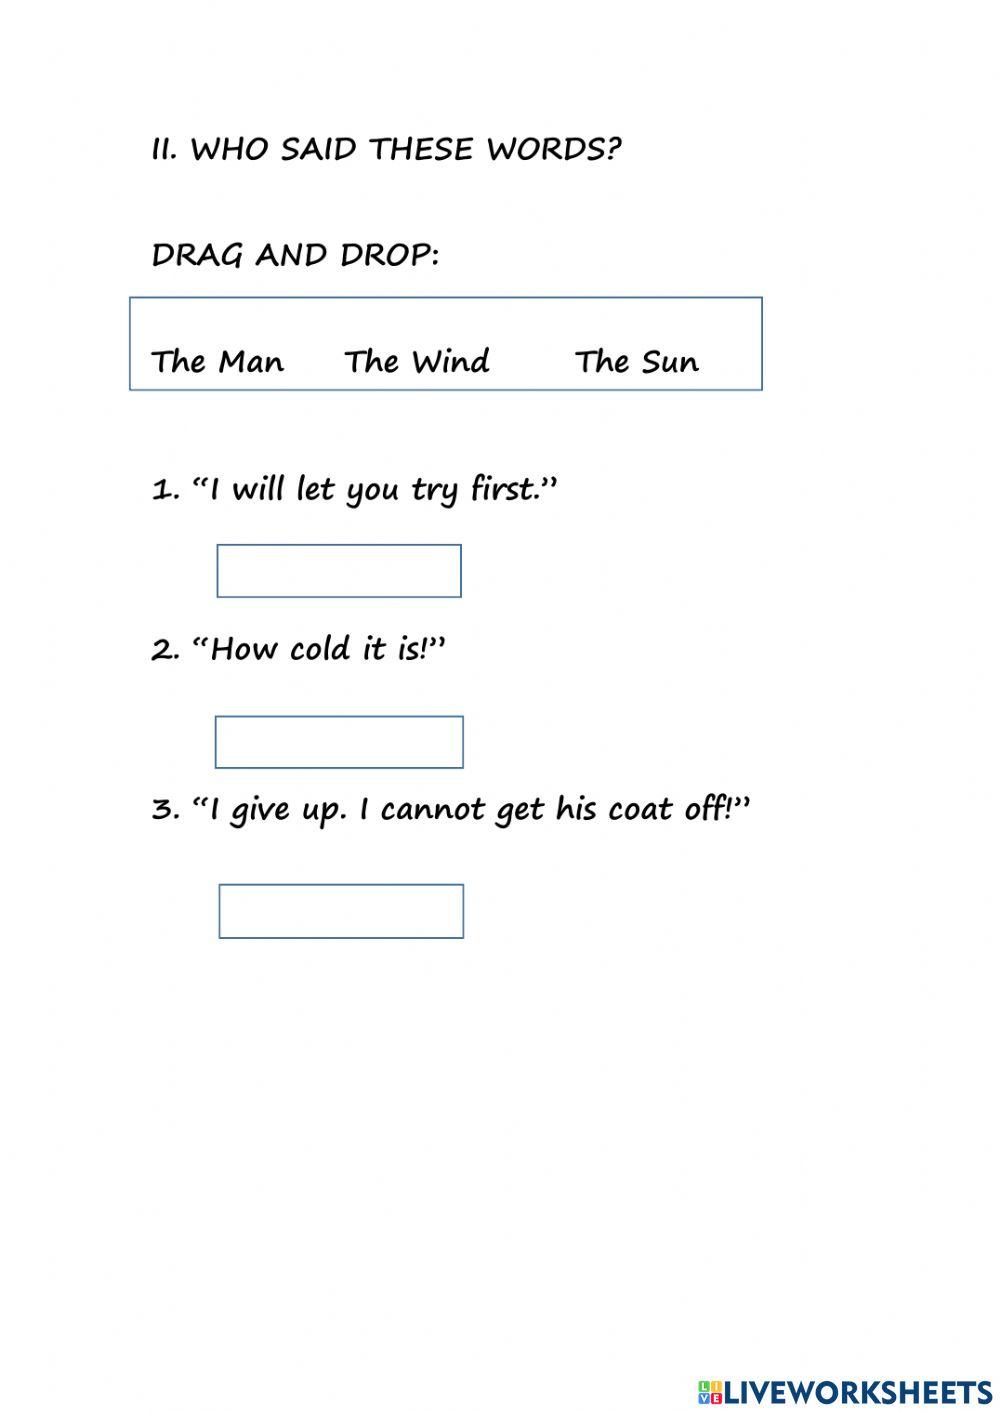 English live worksheet -2- the wind and the sun